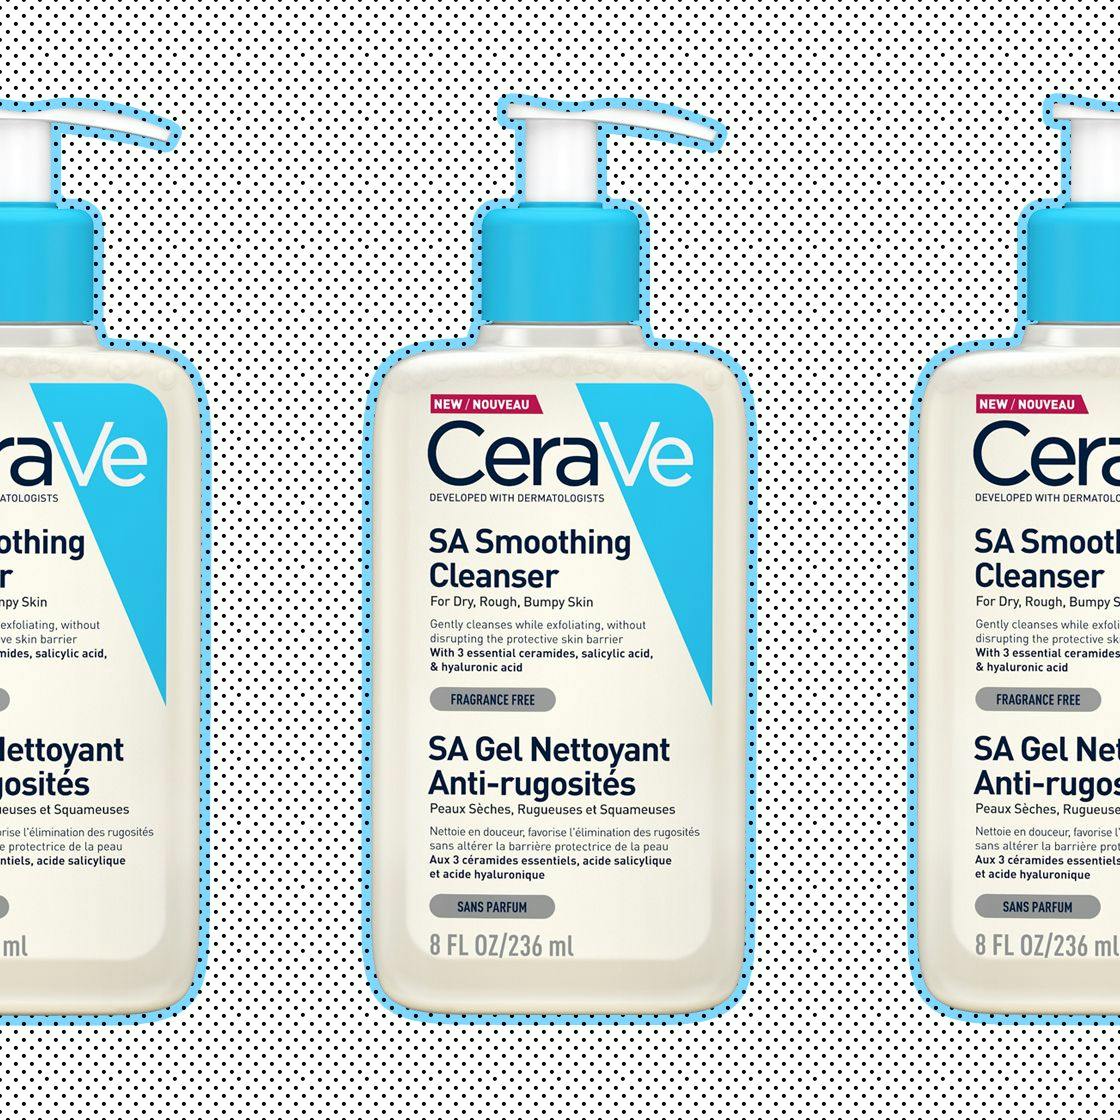 CERAVE Smoothing Cleanser. CERAVE Smoothing Cream Anti-rugosites. CERAVE sa Cleanser. CERAVE sa Smoothing крем. Smoothing cleanser